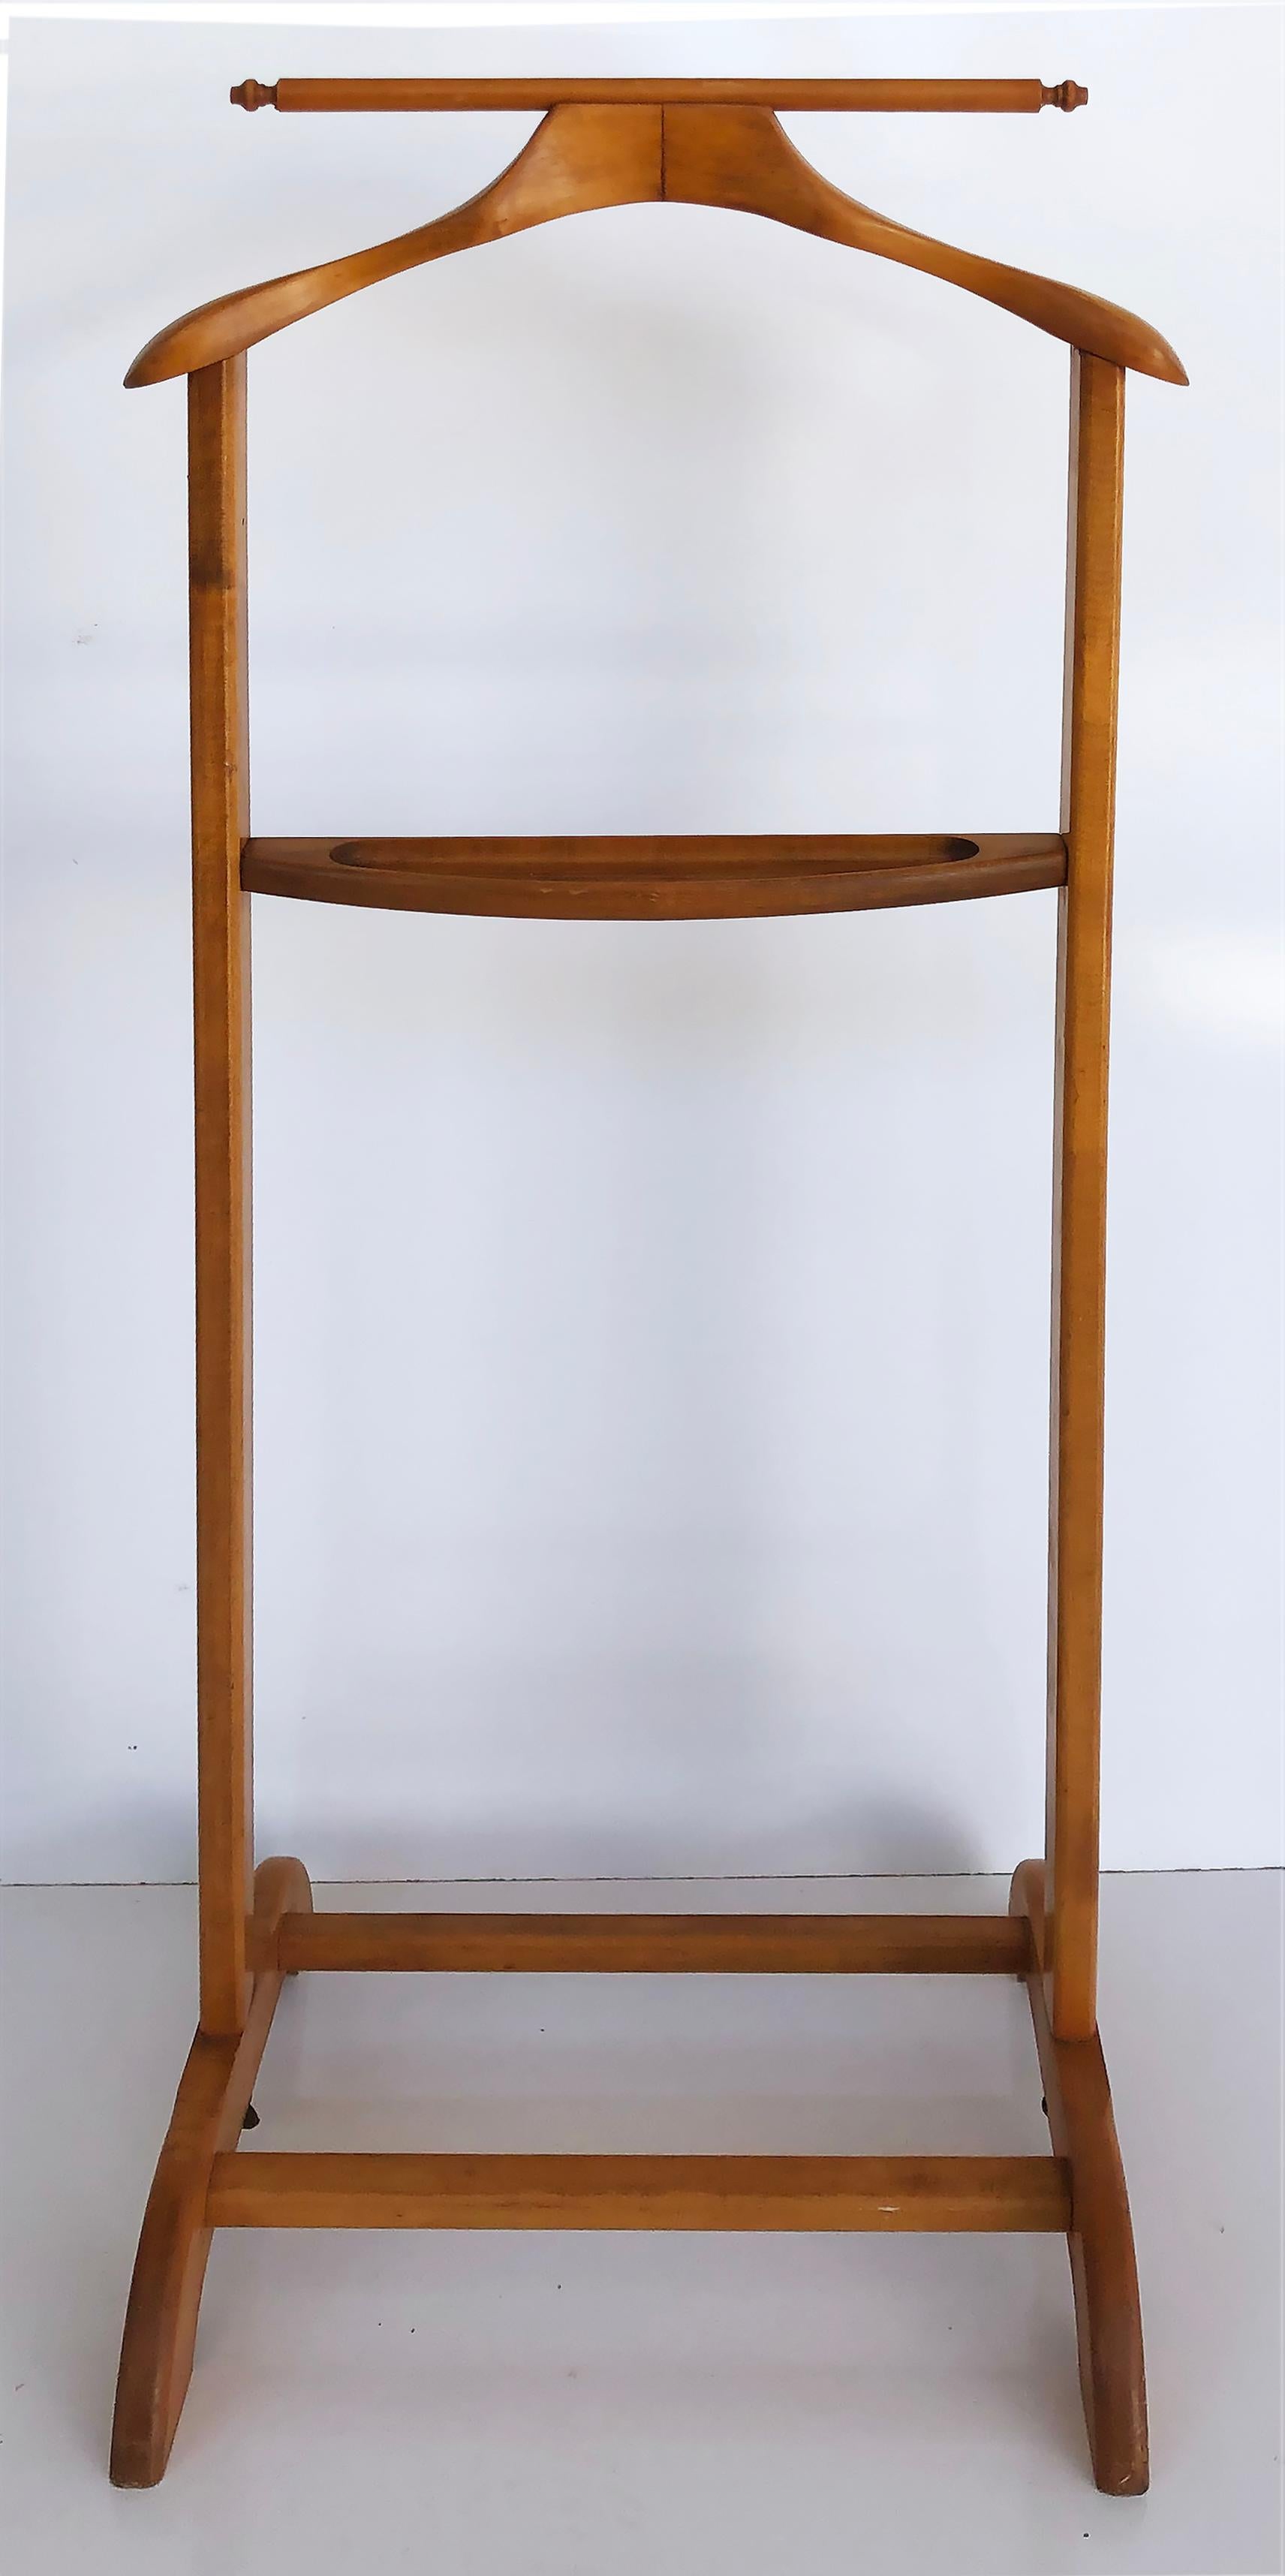 Vintage Italian Maple Wood Valet and Suit clothes stand

Offered for sale is a vintage men's maple clothing valet stand attributed to Fratelli Reguitti. The stand has a bar for hanging trousers, a coat hanger for a suit jacket, and also has a